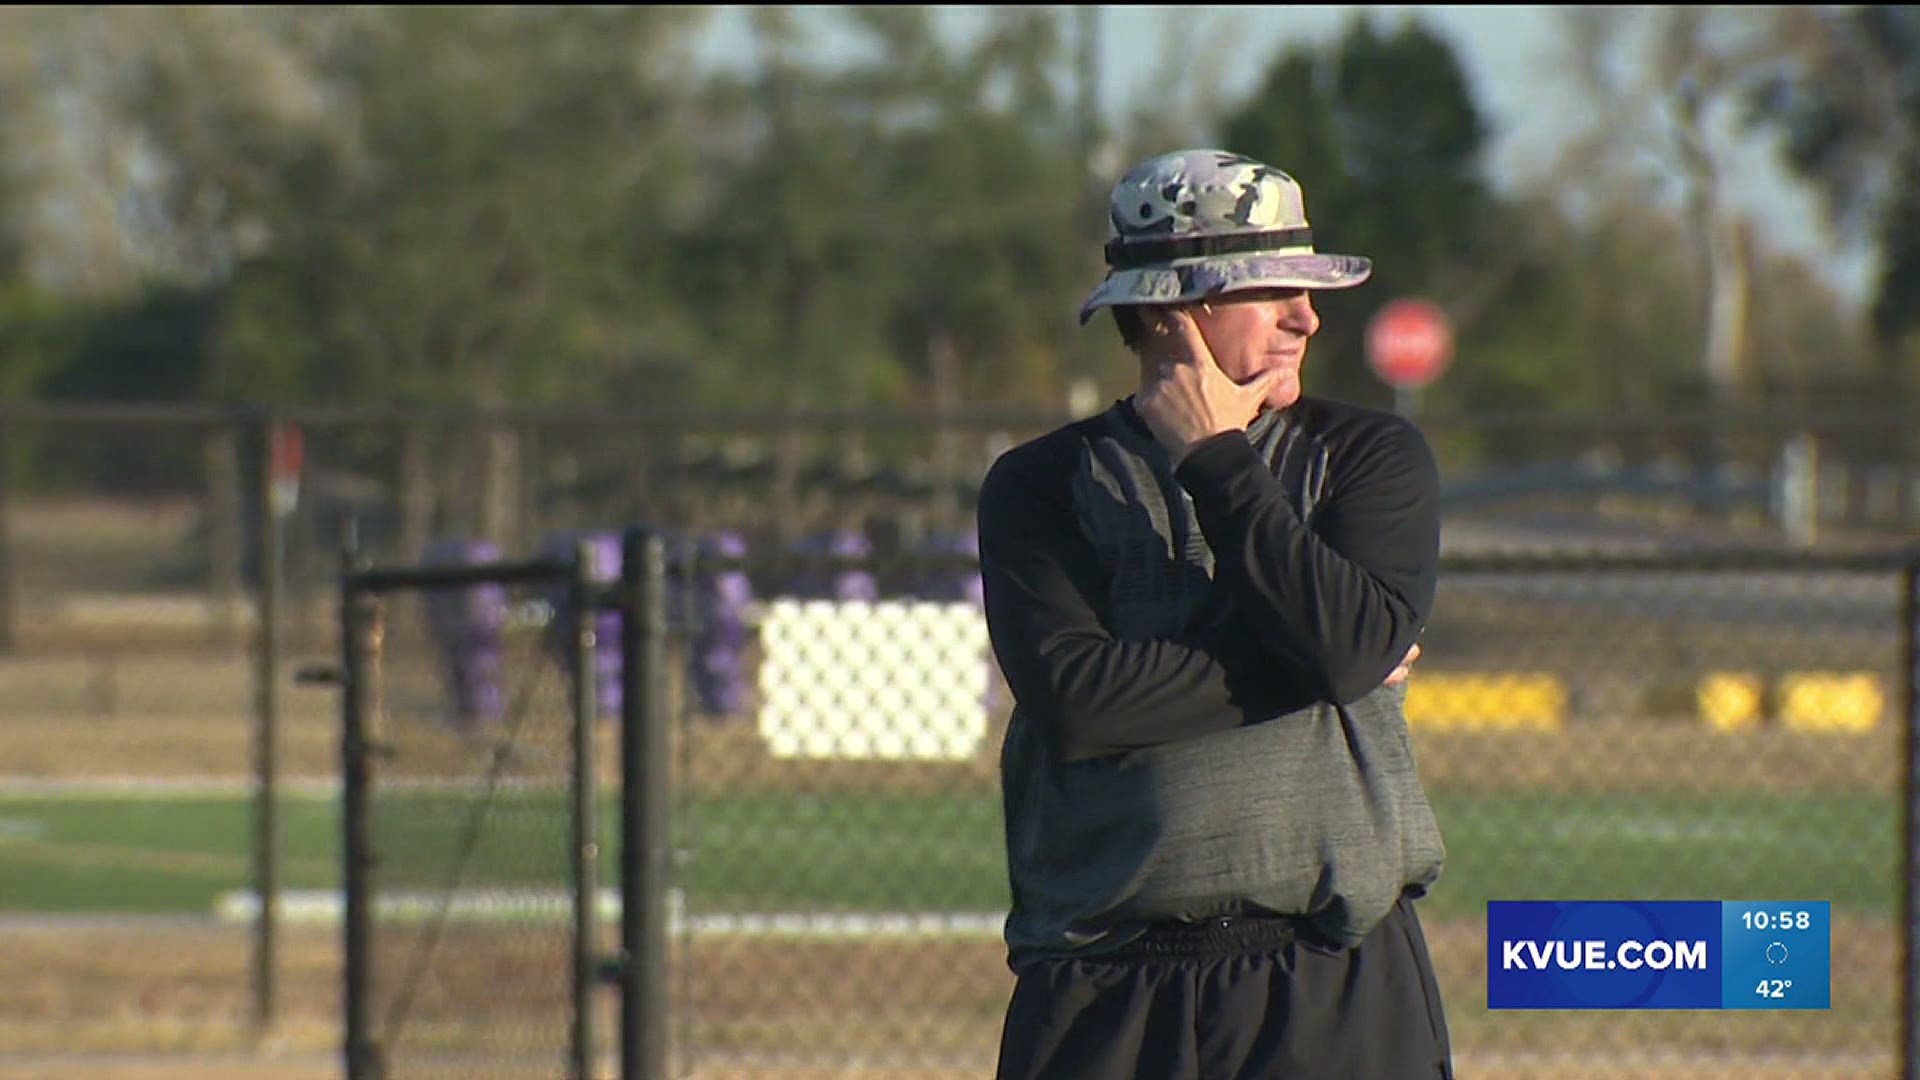 Liberty Hill head coach Jeff Walker died after a years-long bout with kidney cancer, district officials confirmed to KVUE. He was 52 years old.